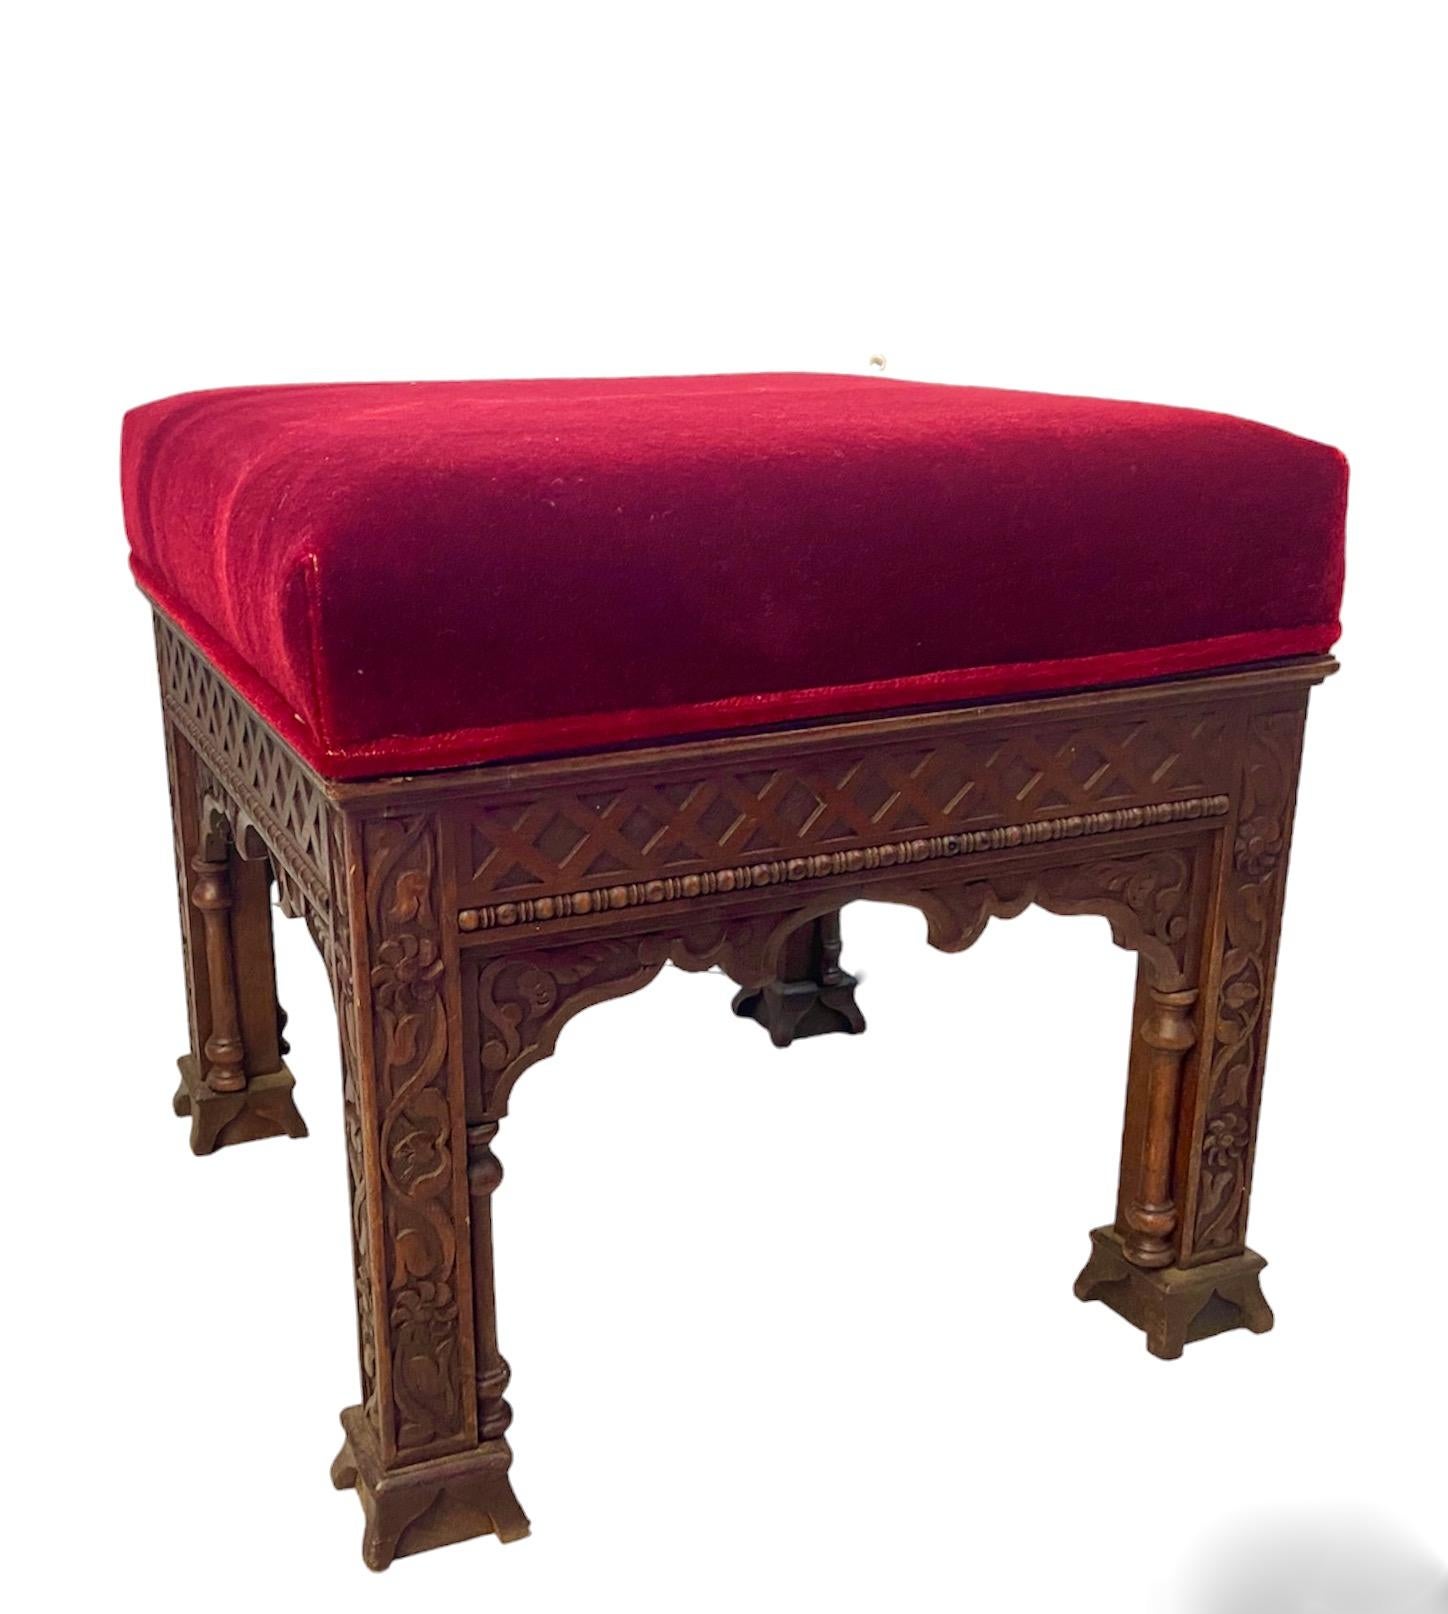 intricate Victorian, Arts and Crafts Moorish Style Stool, possibly Liberty For Sale 5